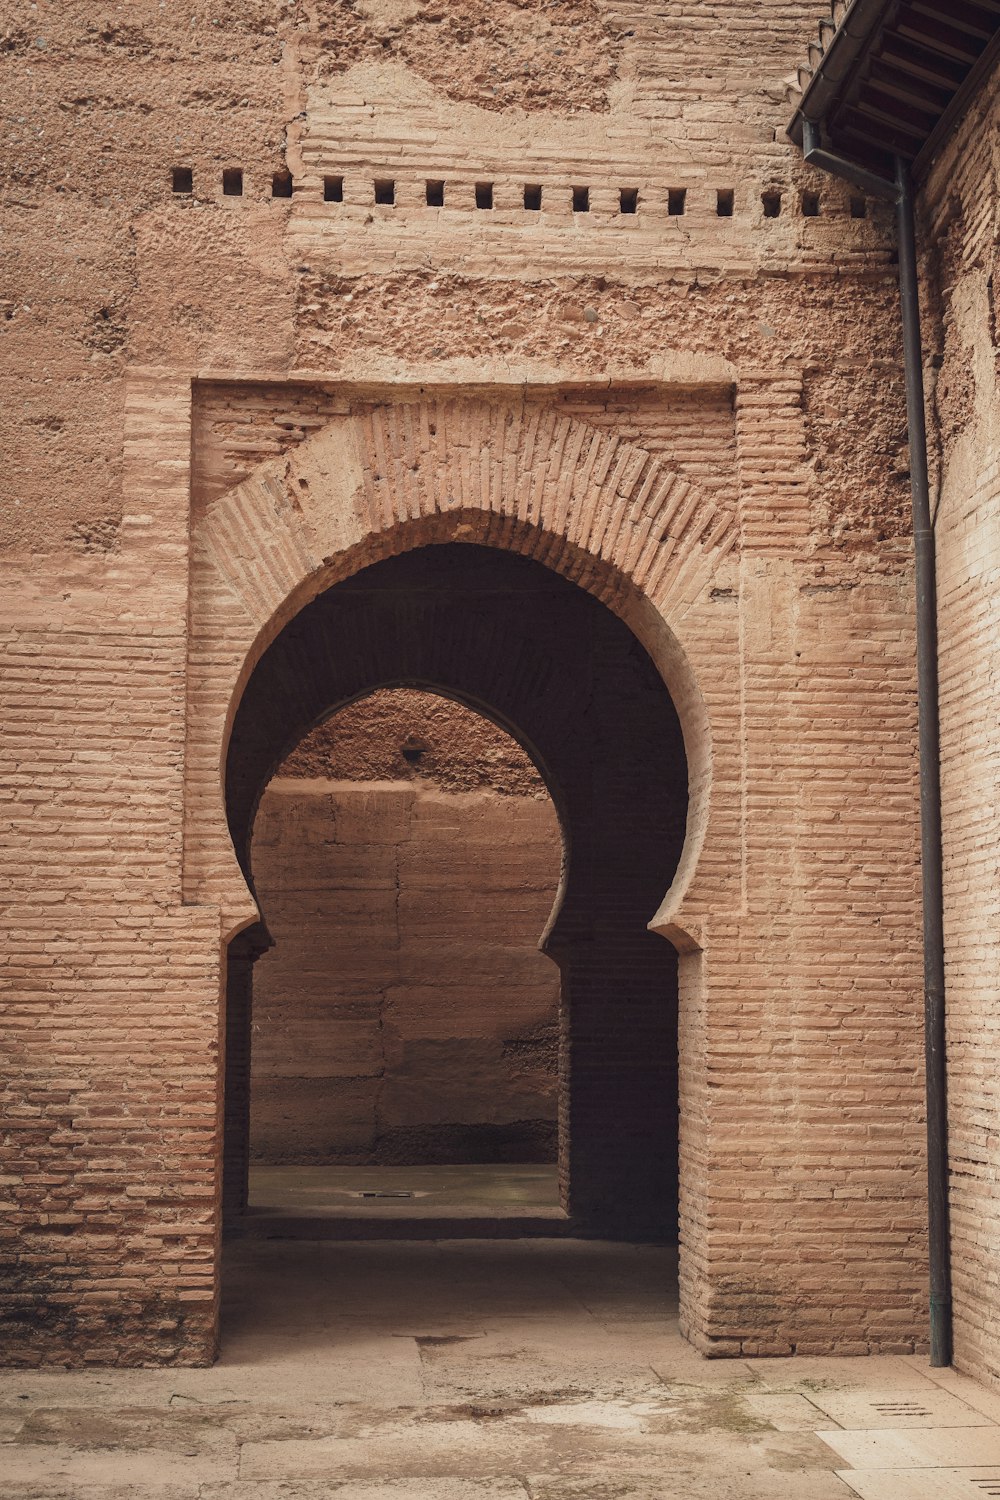 an archway in a brick building with a clock on the wall